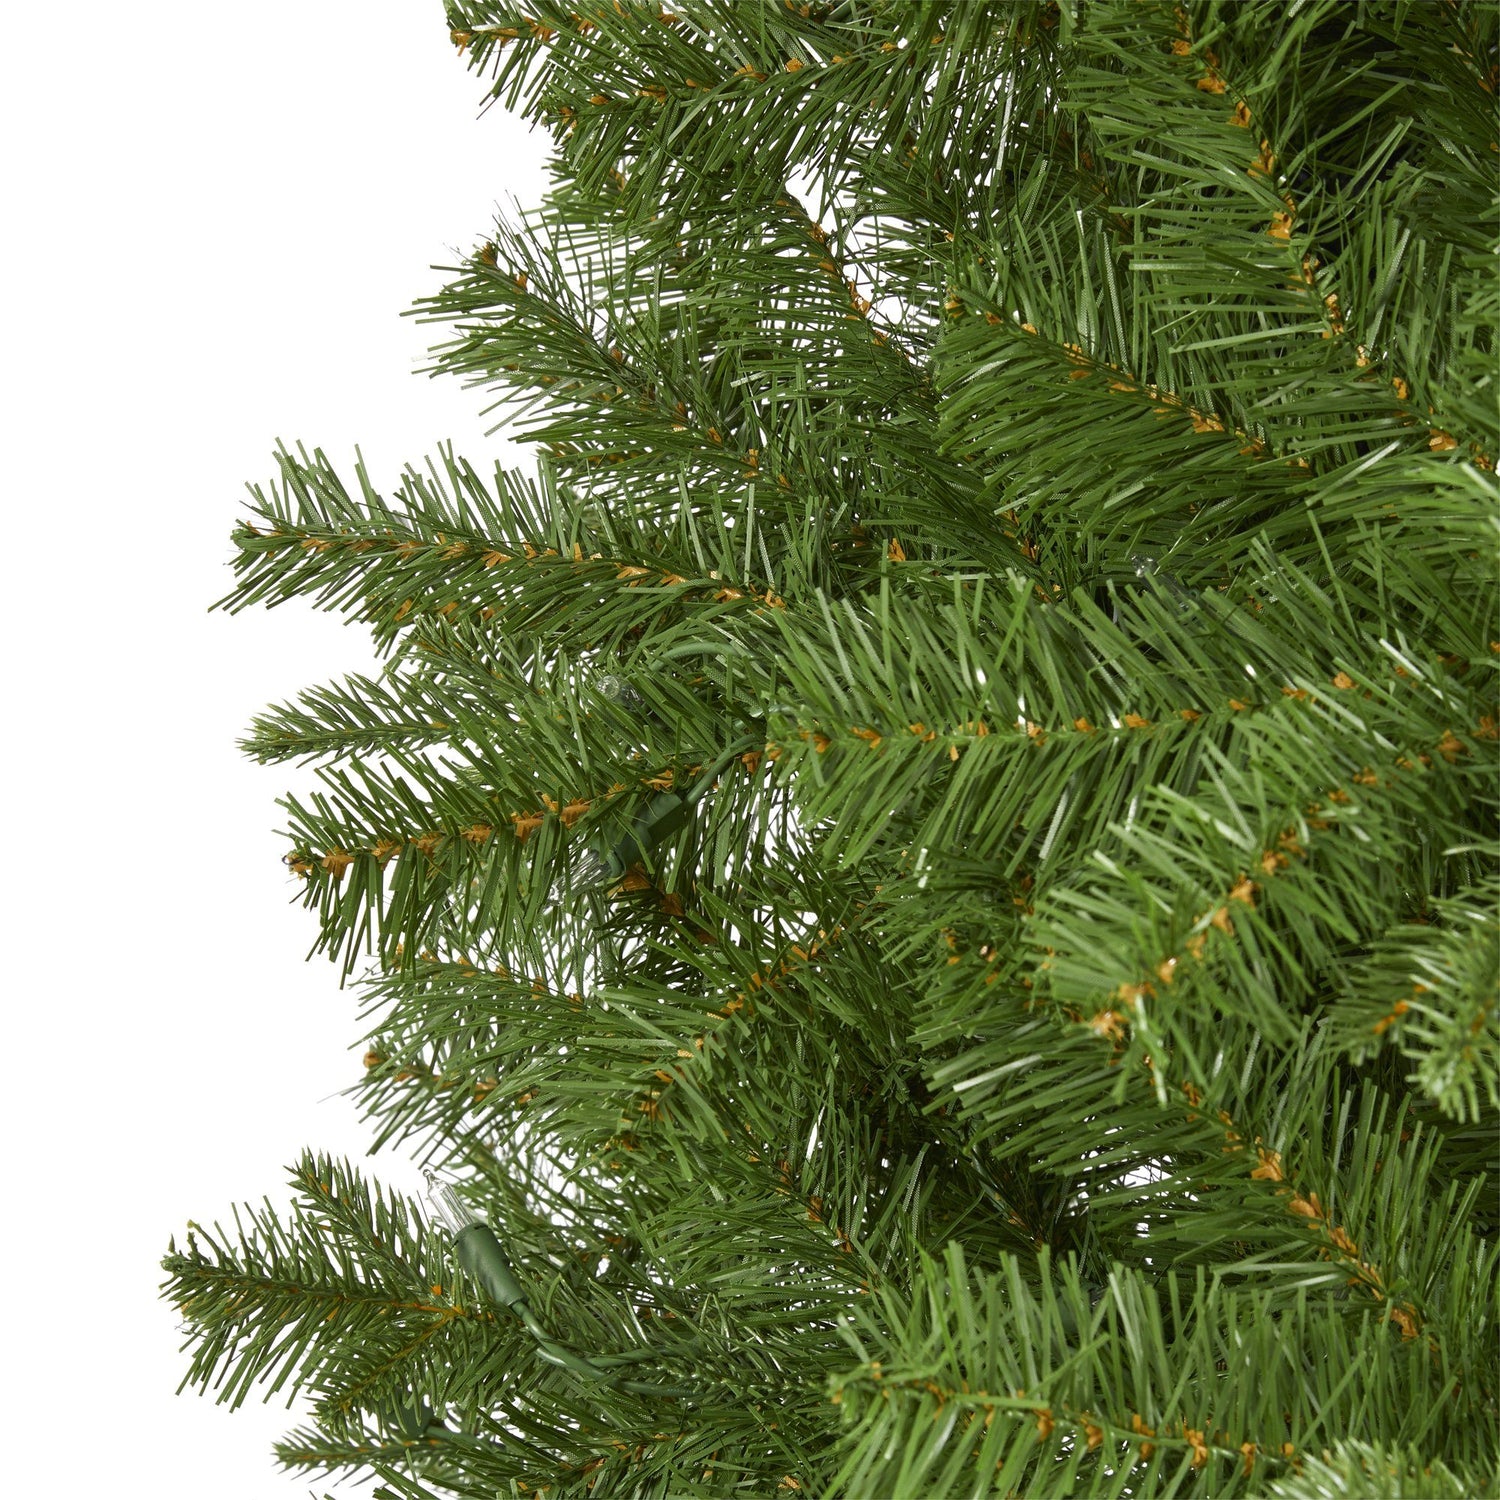 6.5' Vancouver Spruce Artificial Christmas Tree with 250 Warm White Lights and 803 Bendable Branches